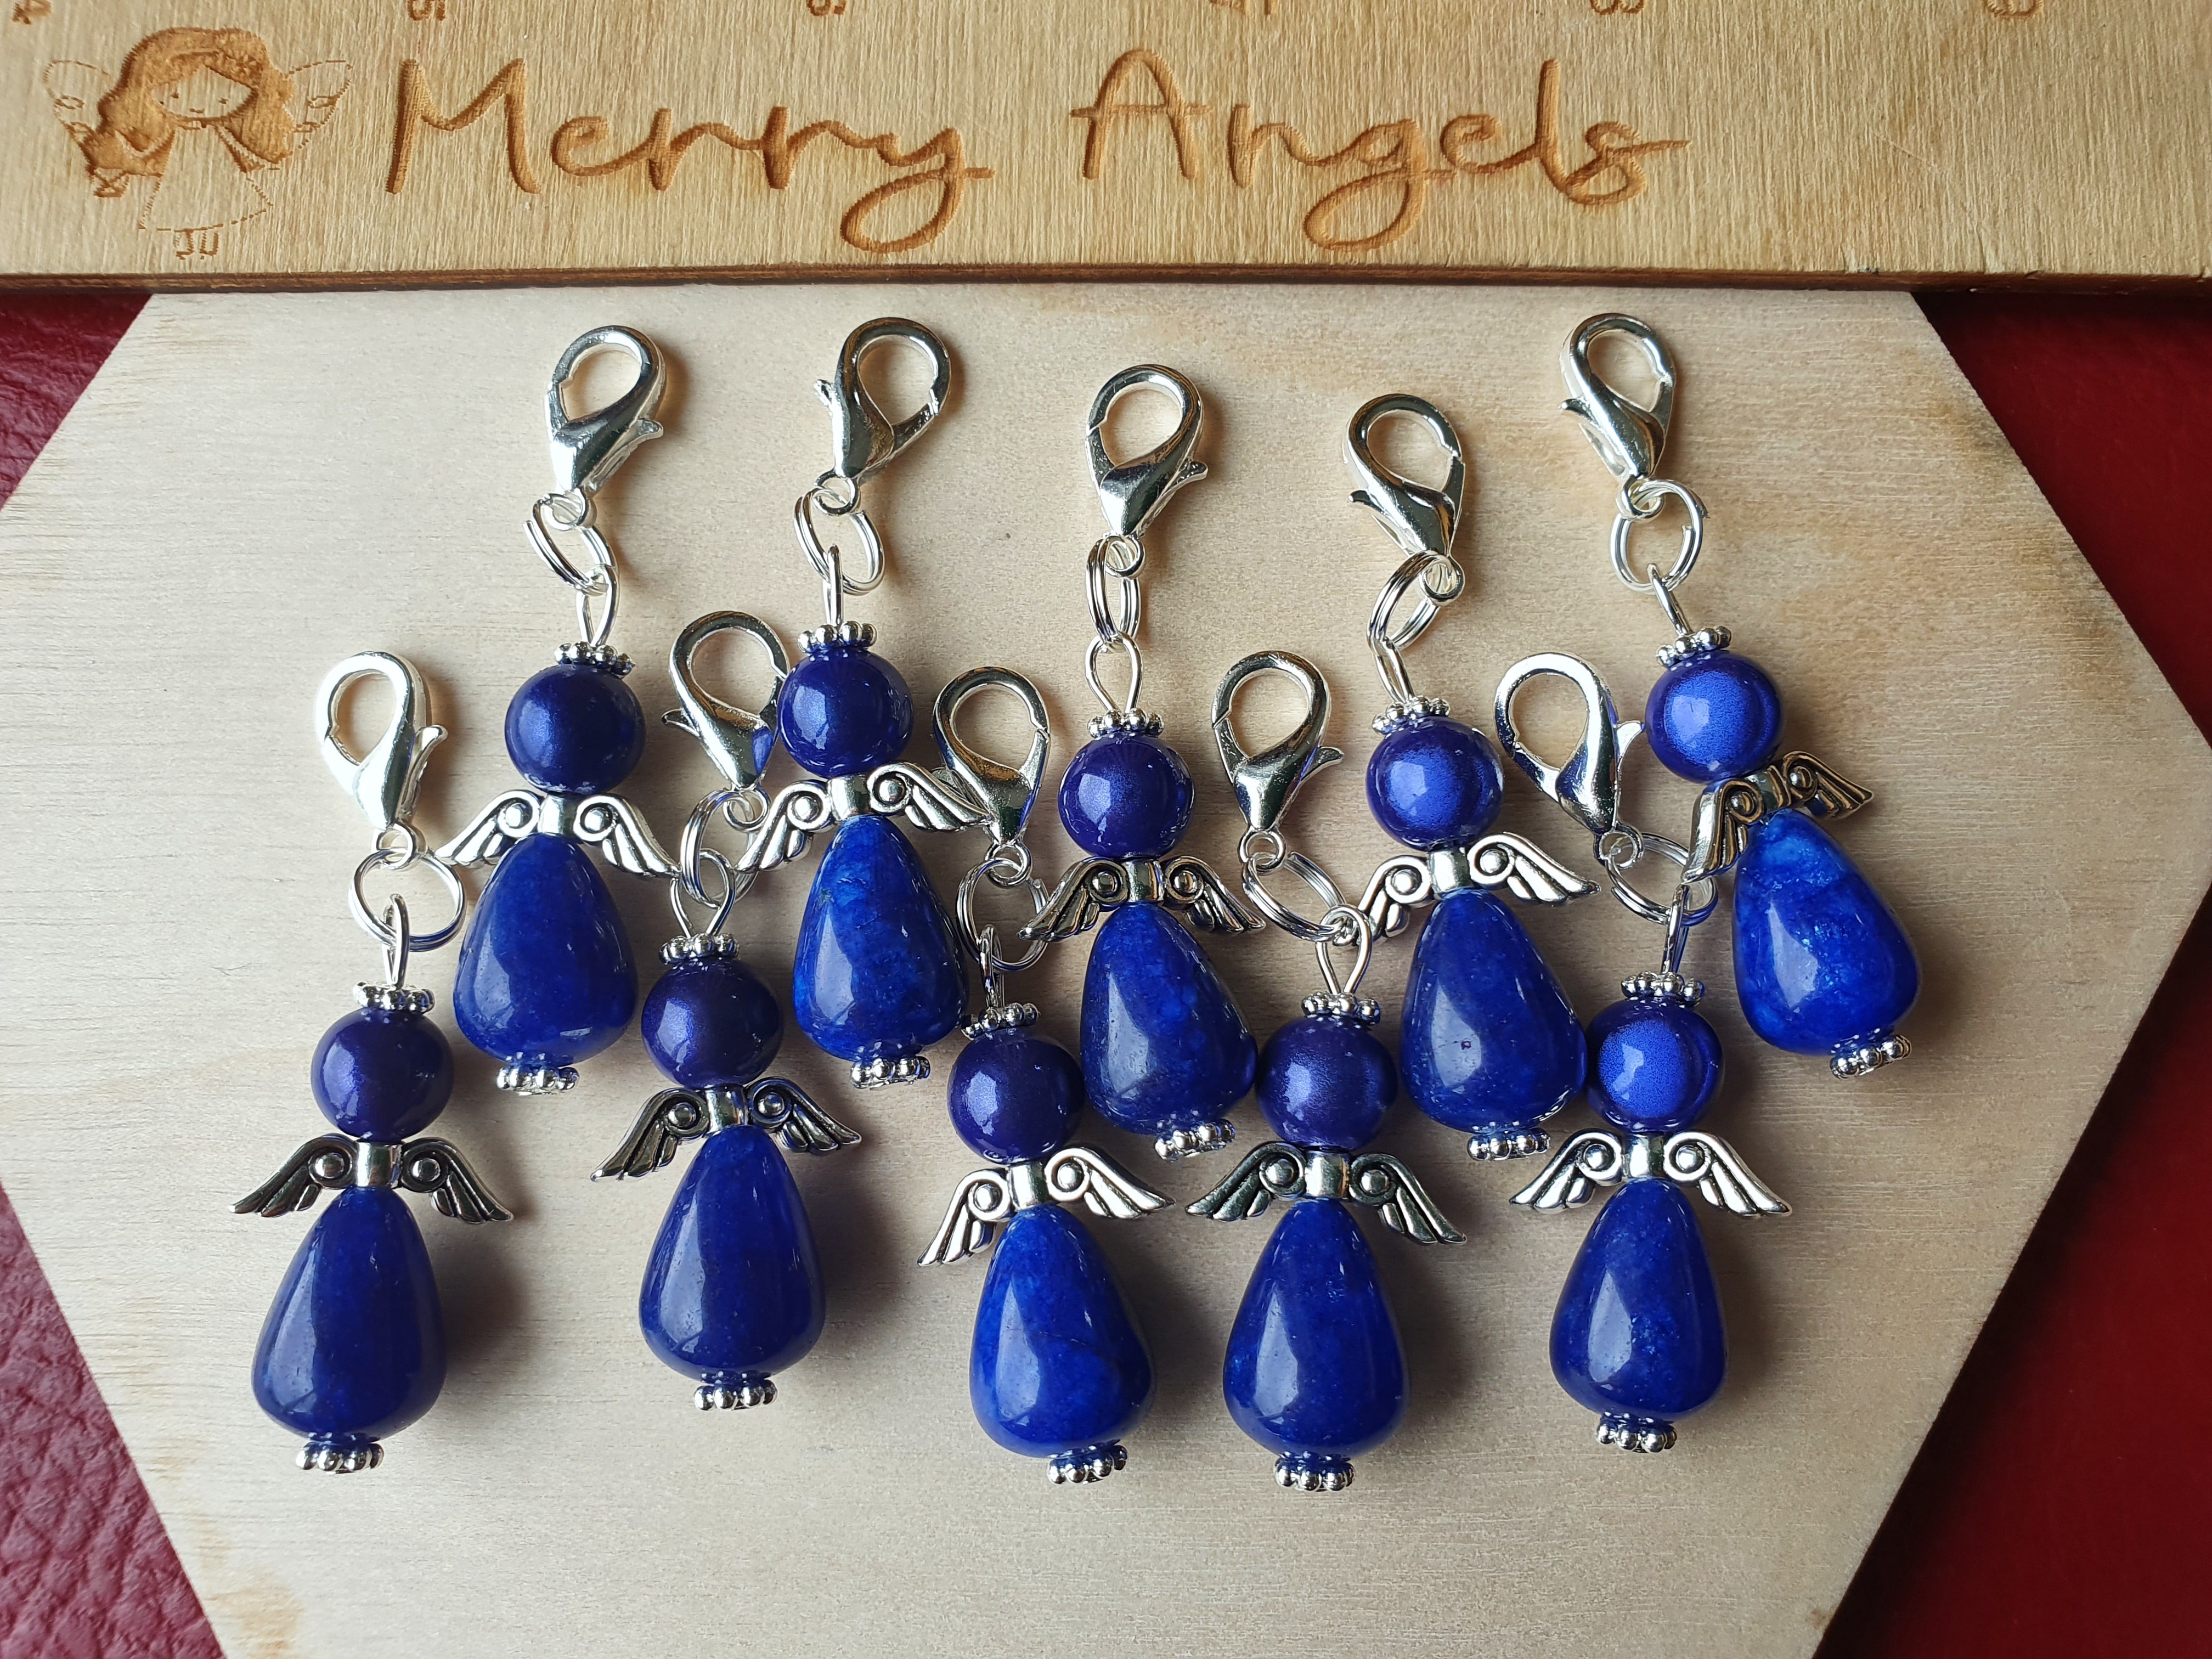 10 Angel hugs Party/Wedding Favours